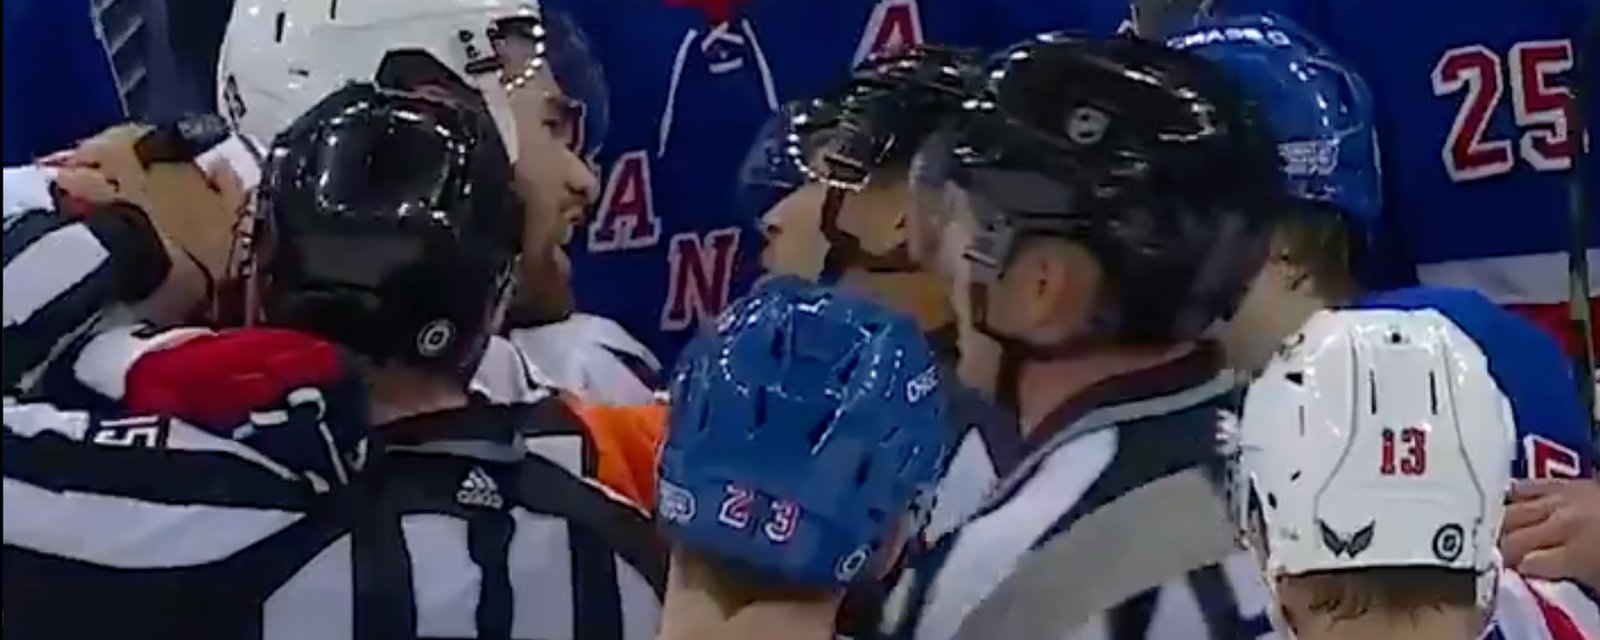 Tom Wilson loses it and needs to be restrained by 3 officials as he attacks Rangers